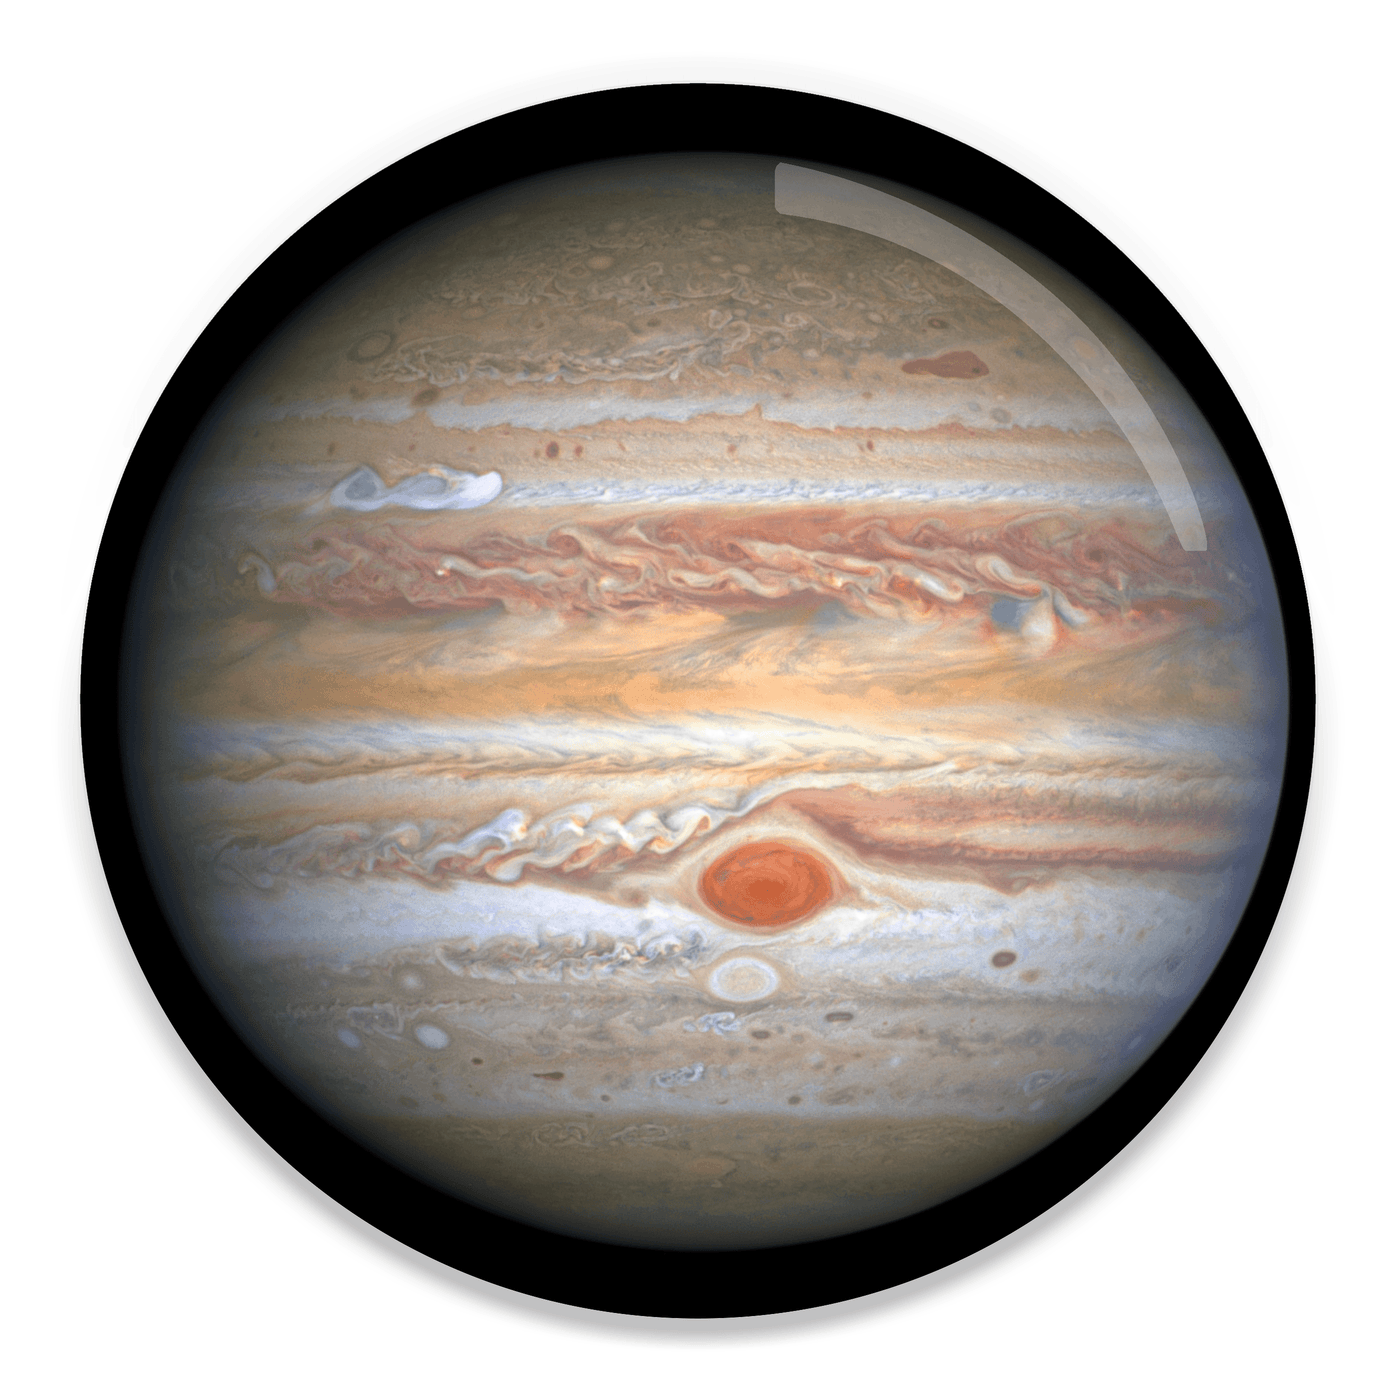 2.25 inch round colorful magnet with image of Jupiter